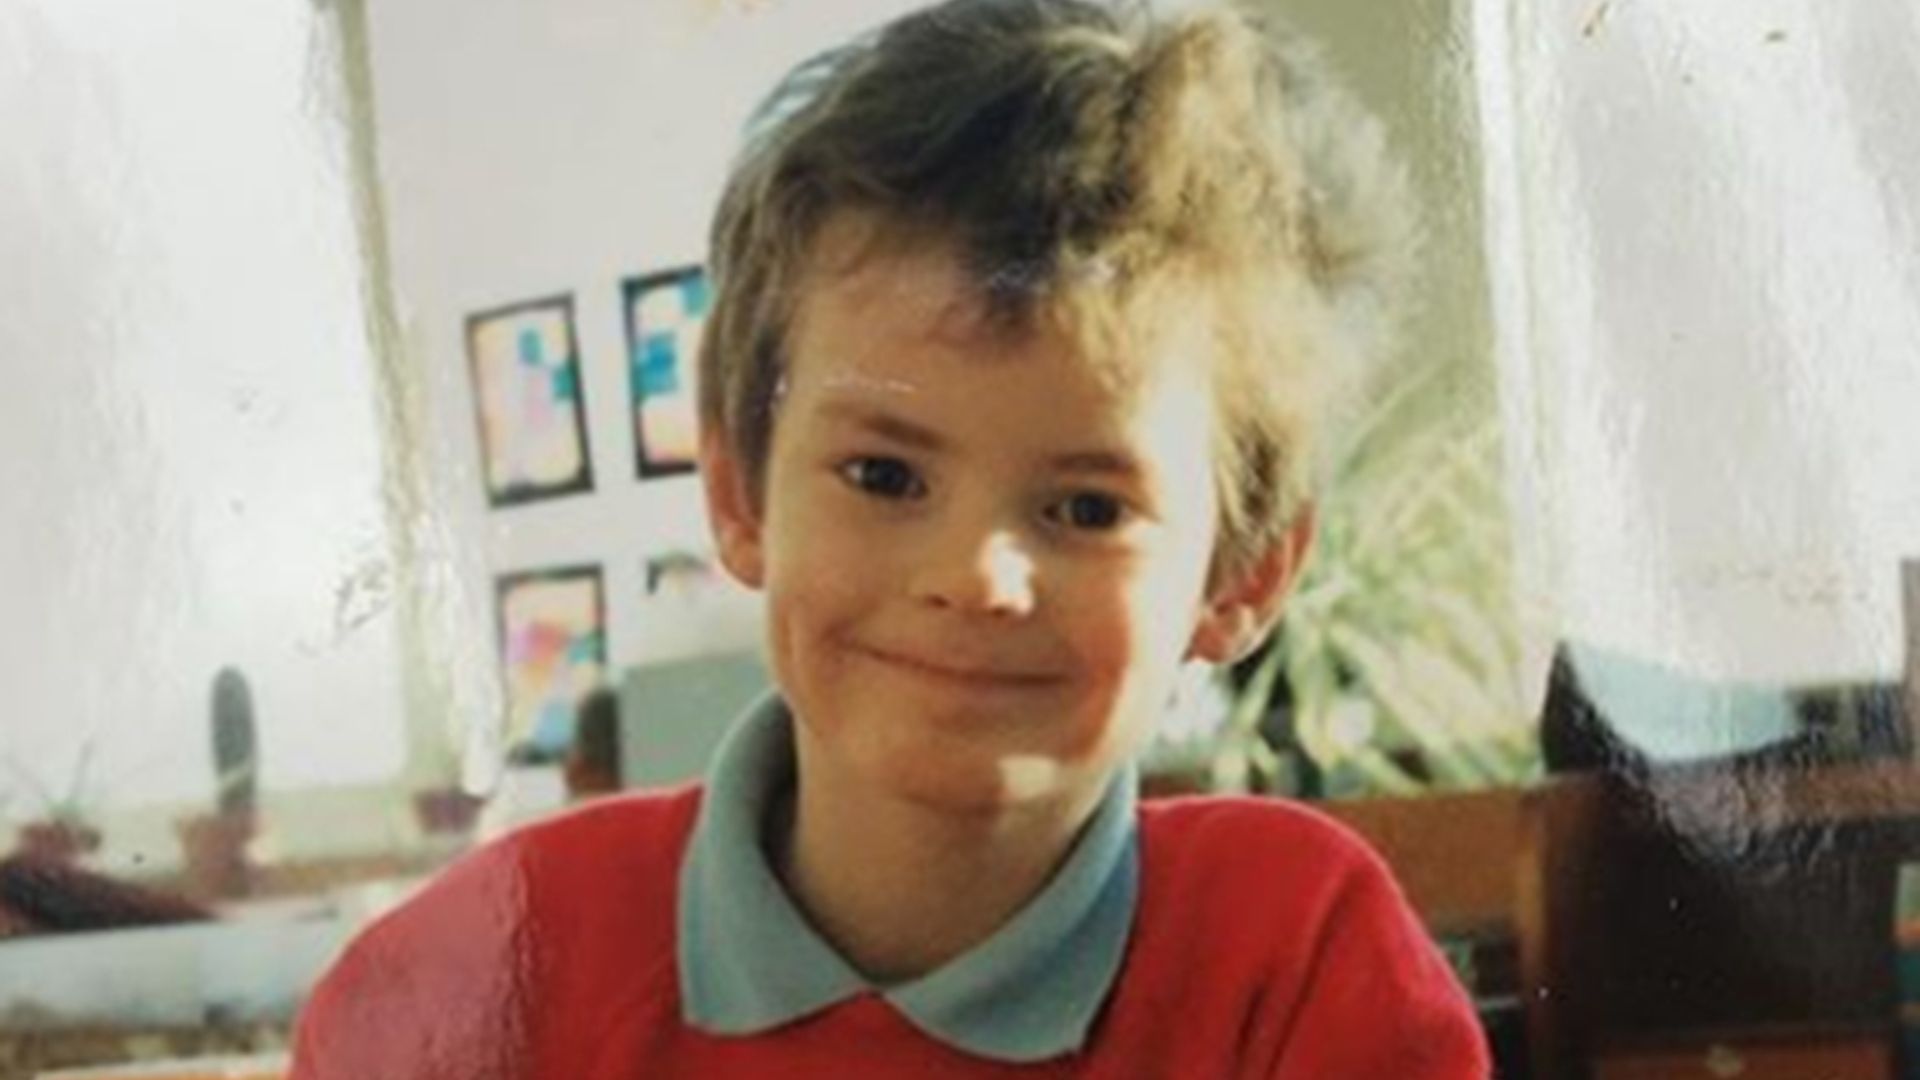 Does Andy Murray remind you of a certain movie star in this childhood photo?